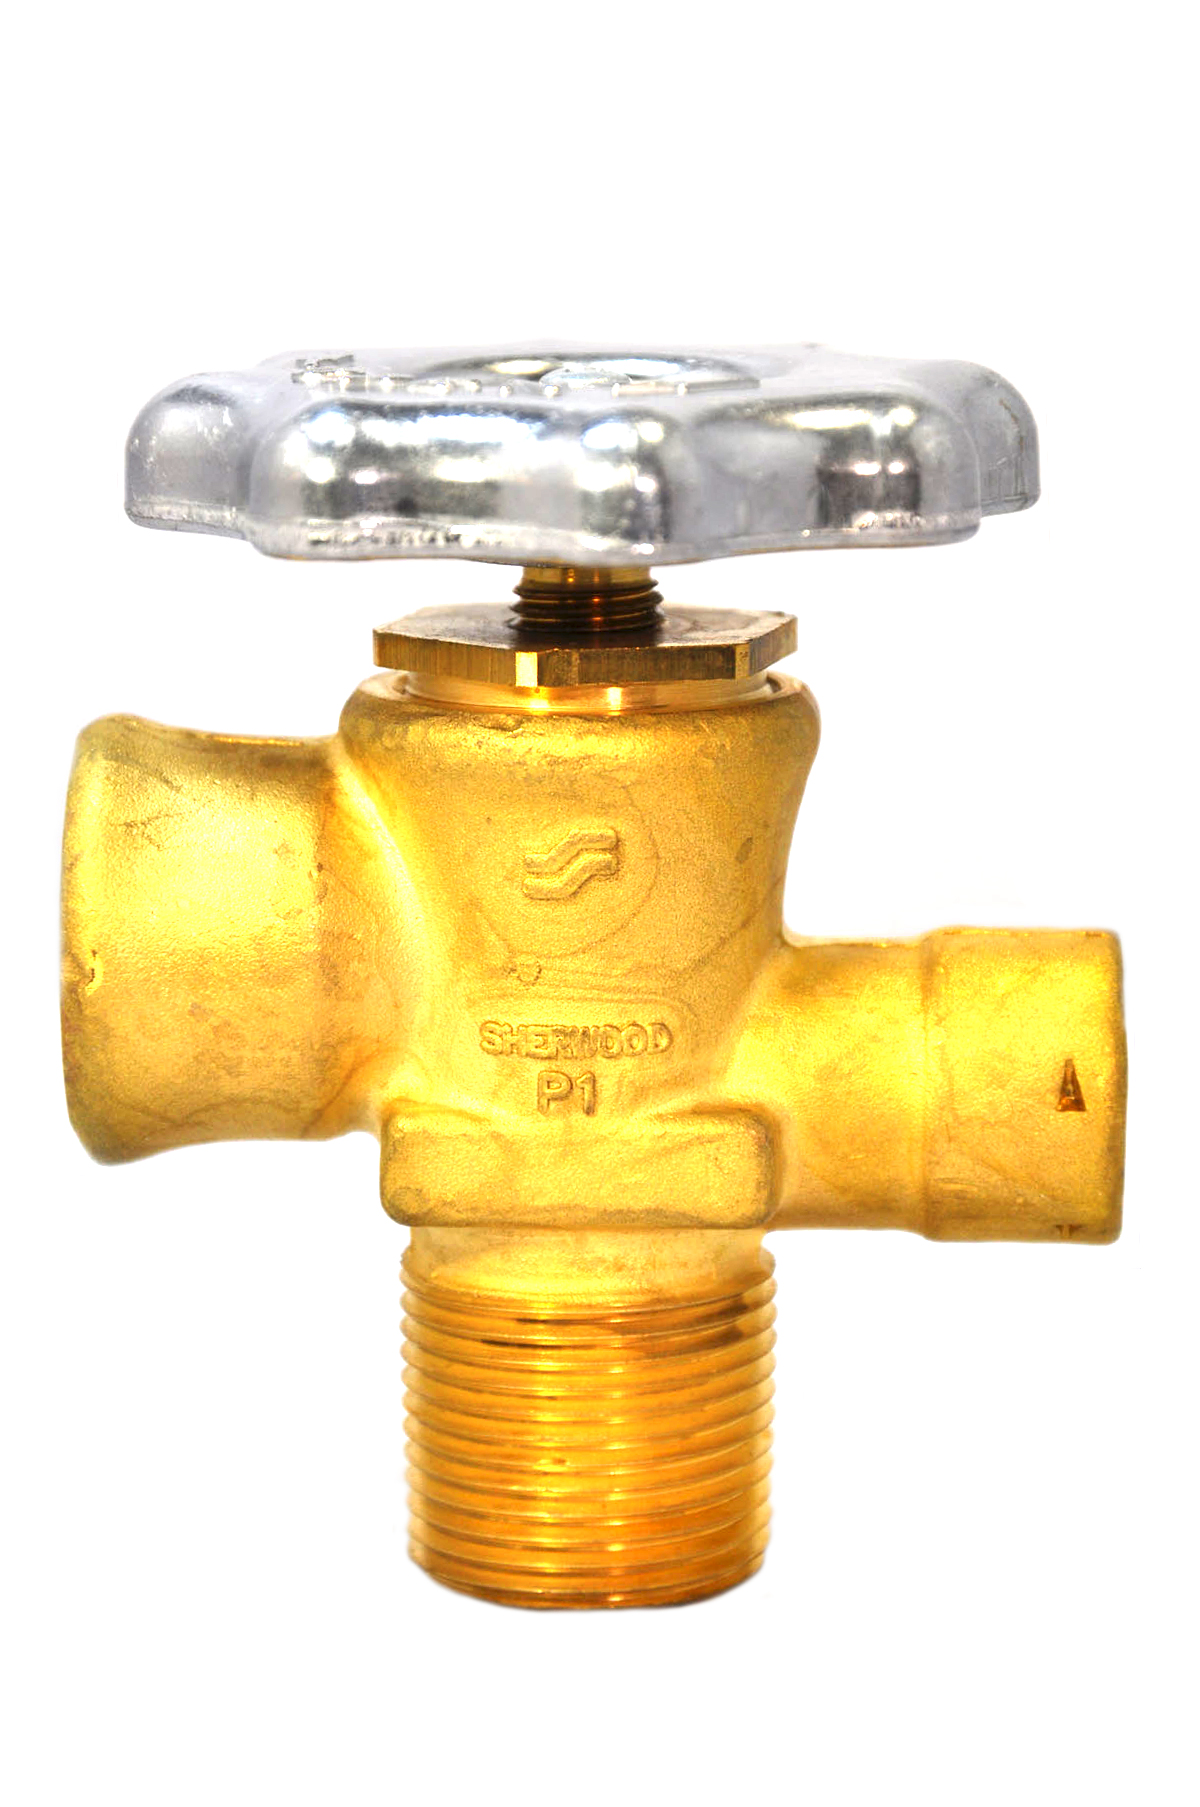 Diaphragm Valves - MAPP and Non-Flammables